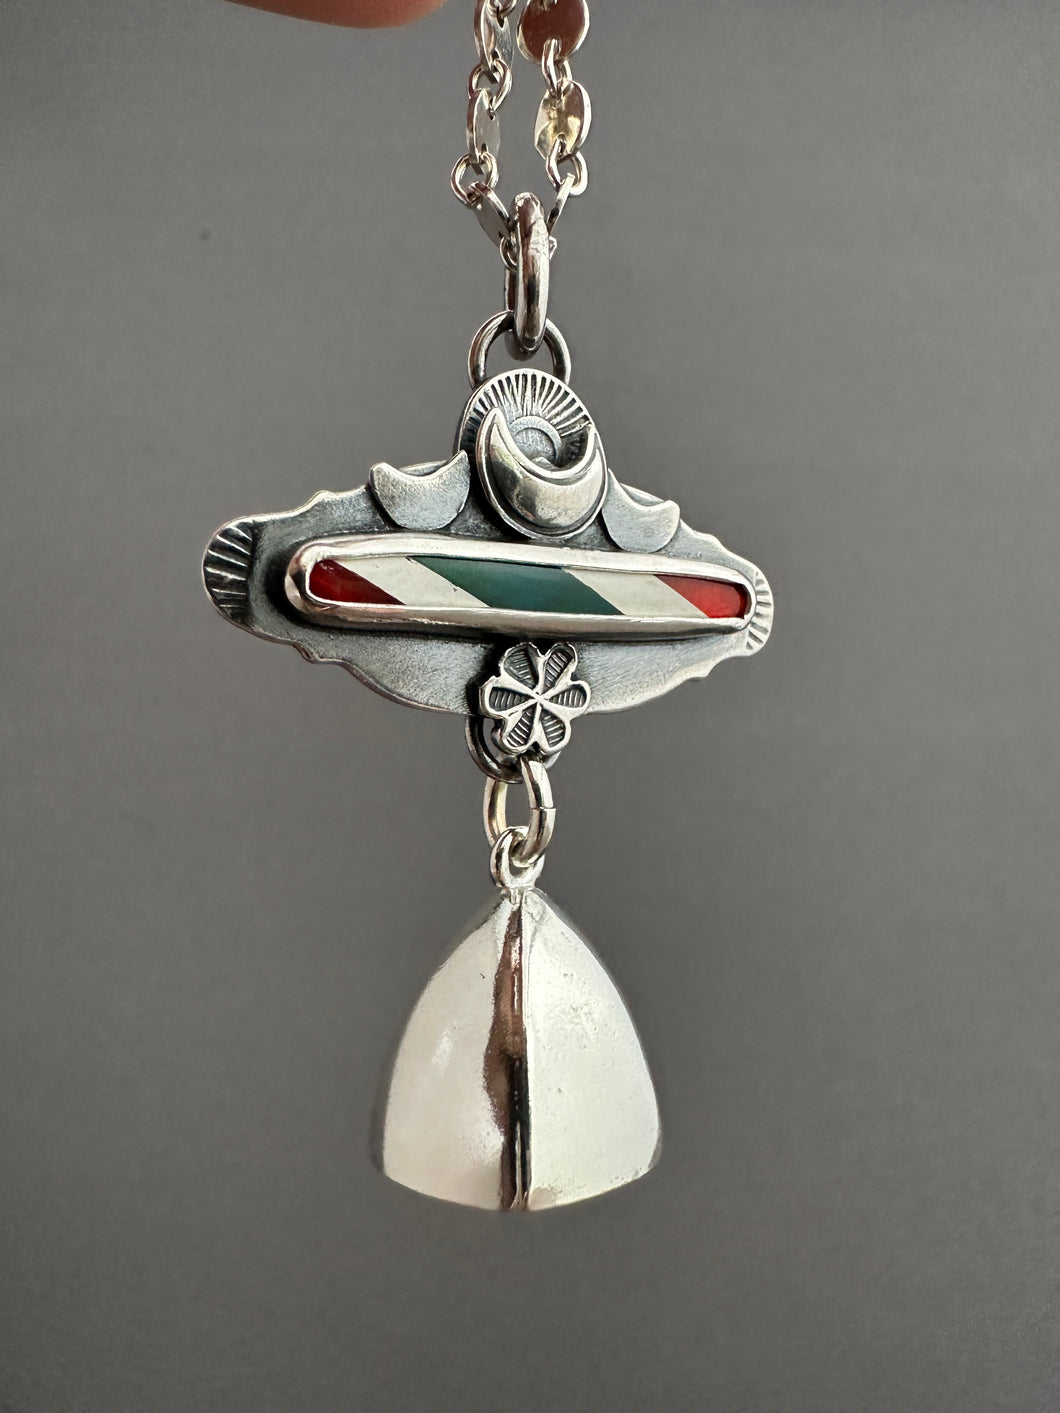 Candy Cane and Silver Bell Pendant